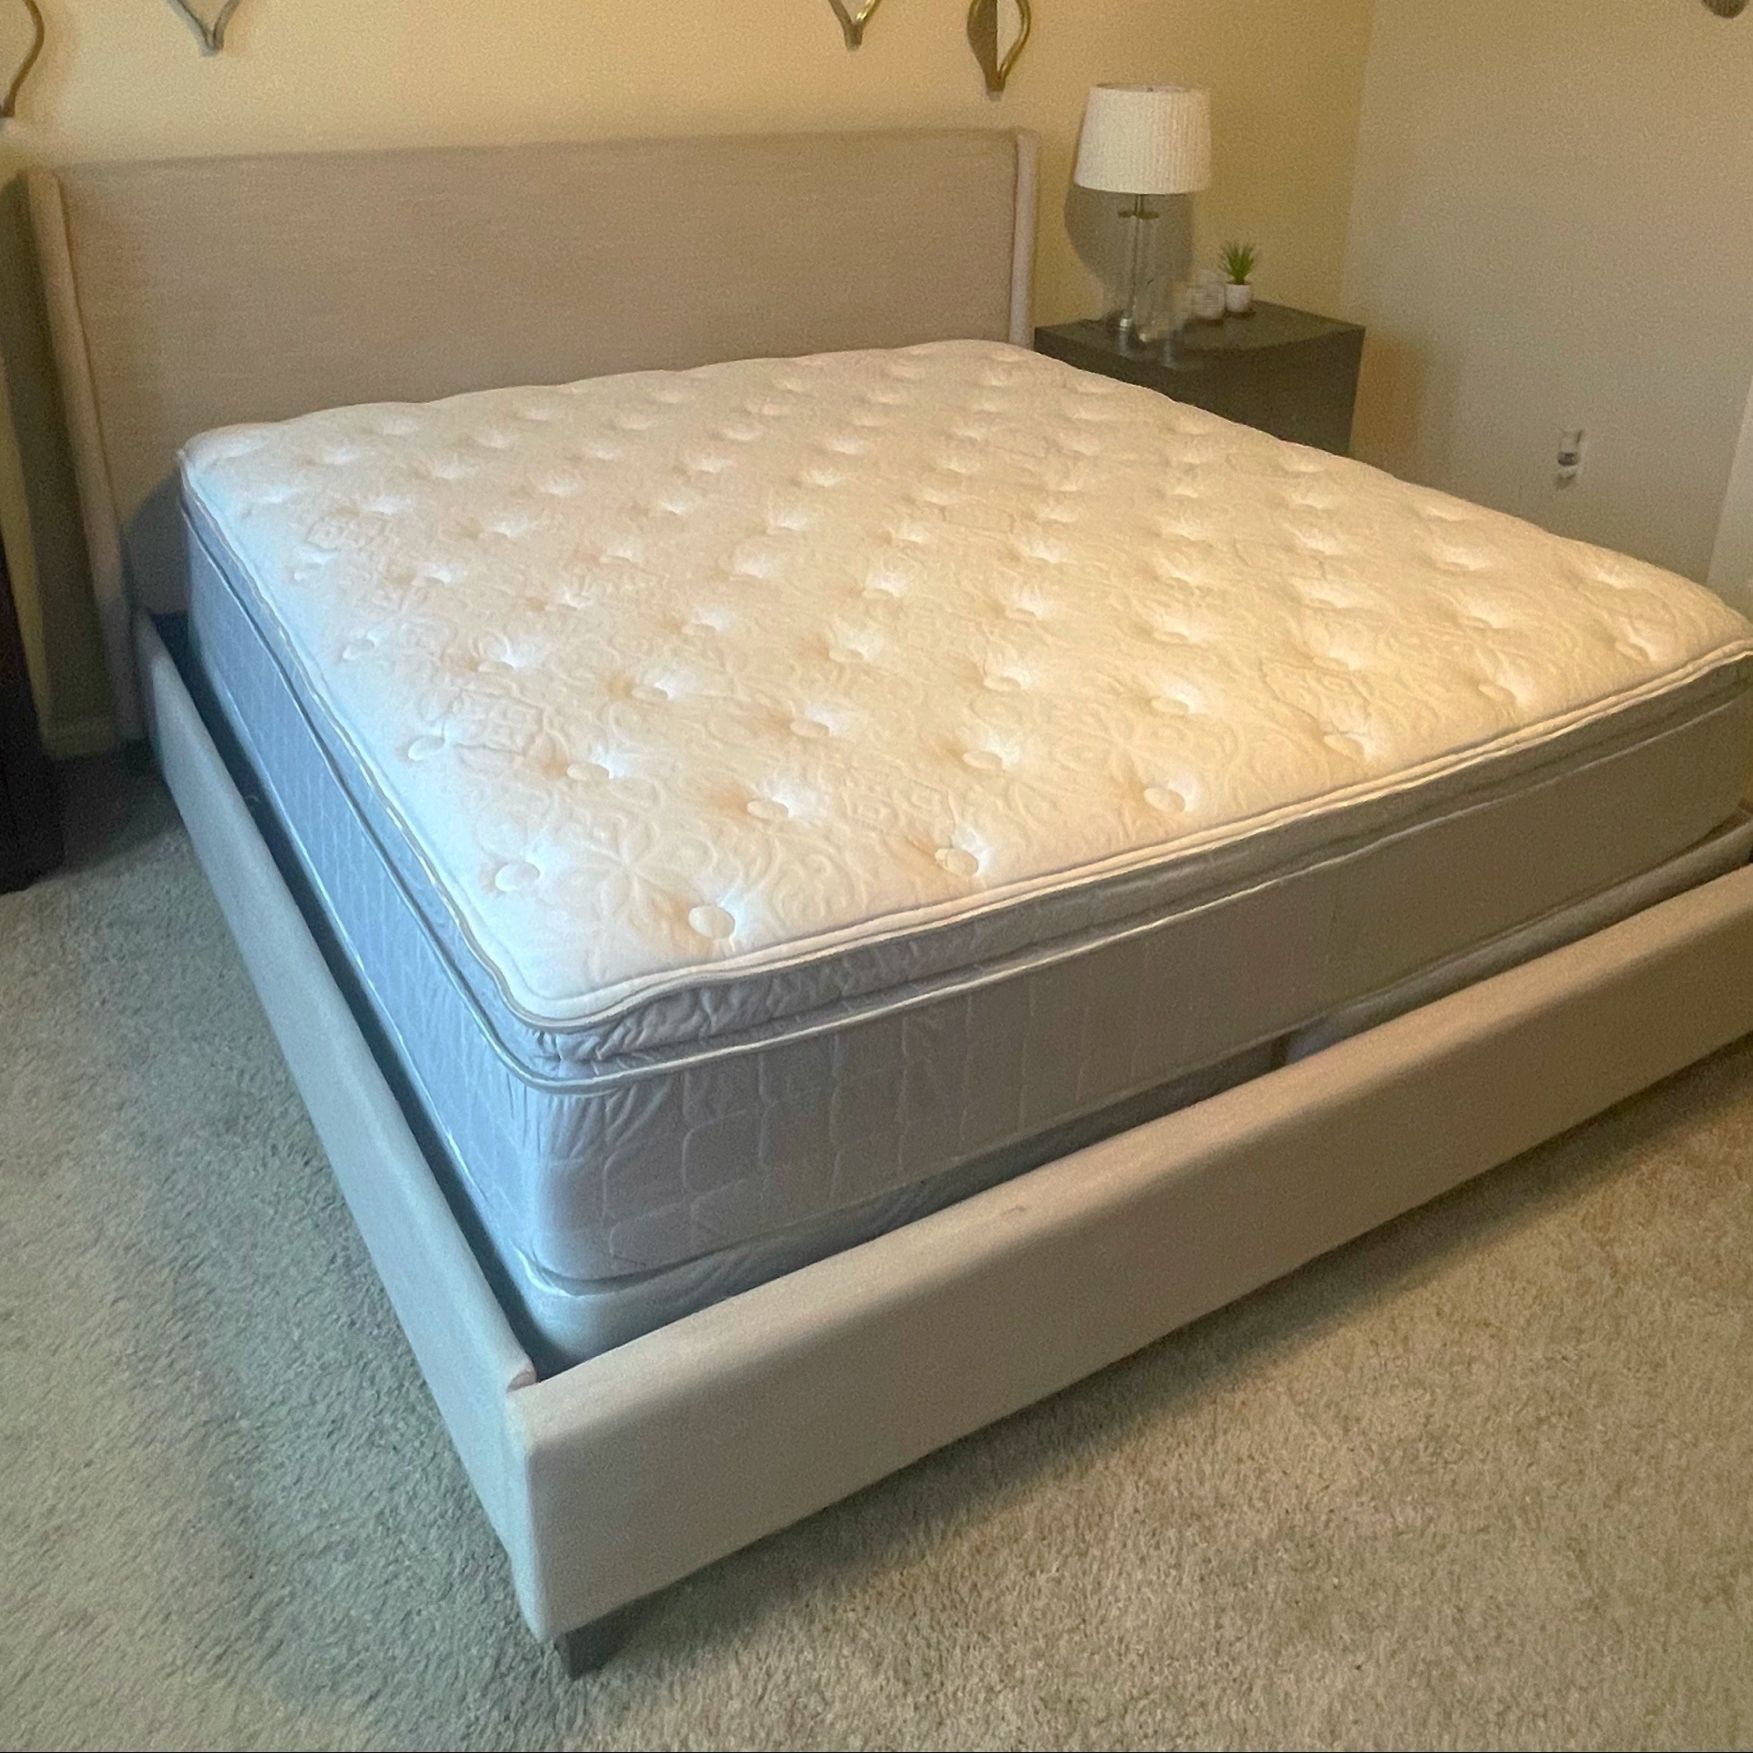 Moving Sale - King Size Bed Frame, Full Bed And Mattress, Bar Stools, Patio Set, Desk, Wall Shelf 